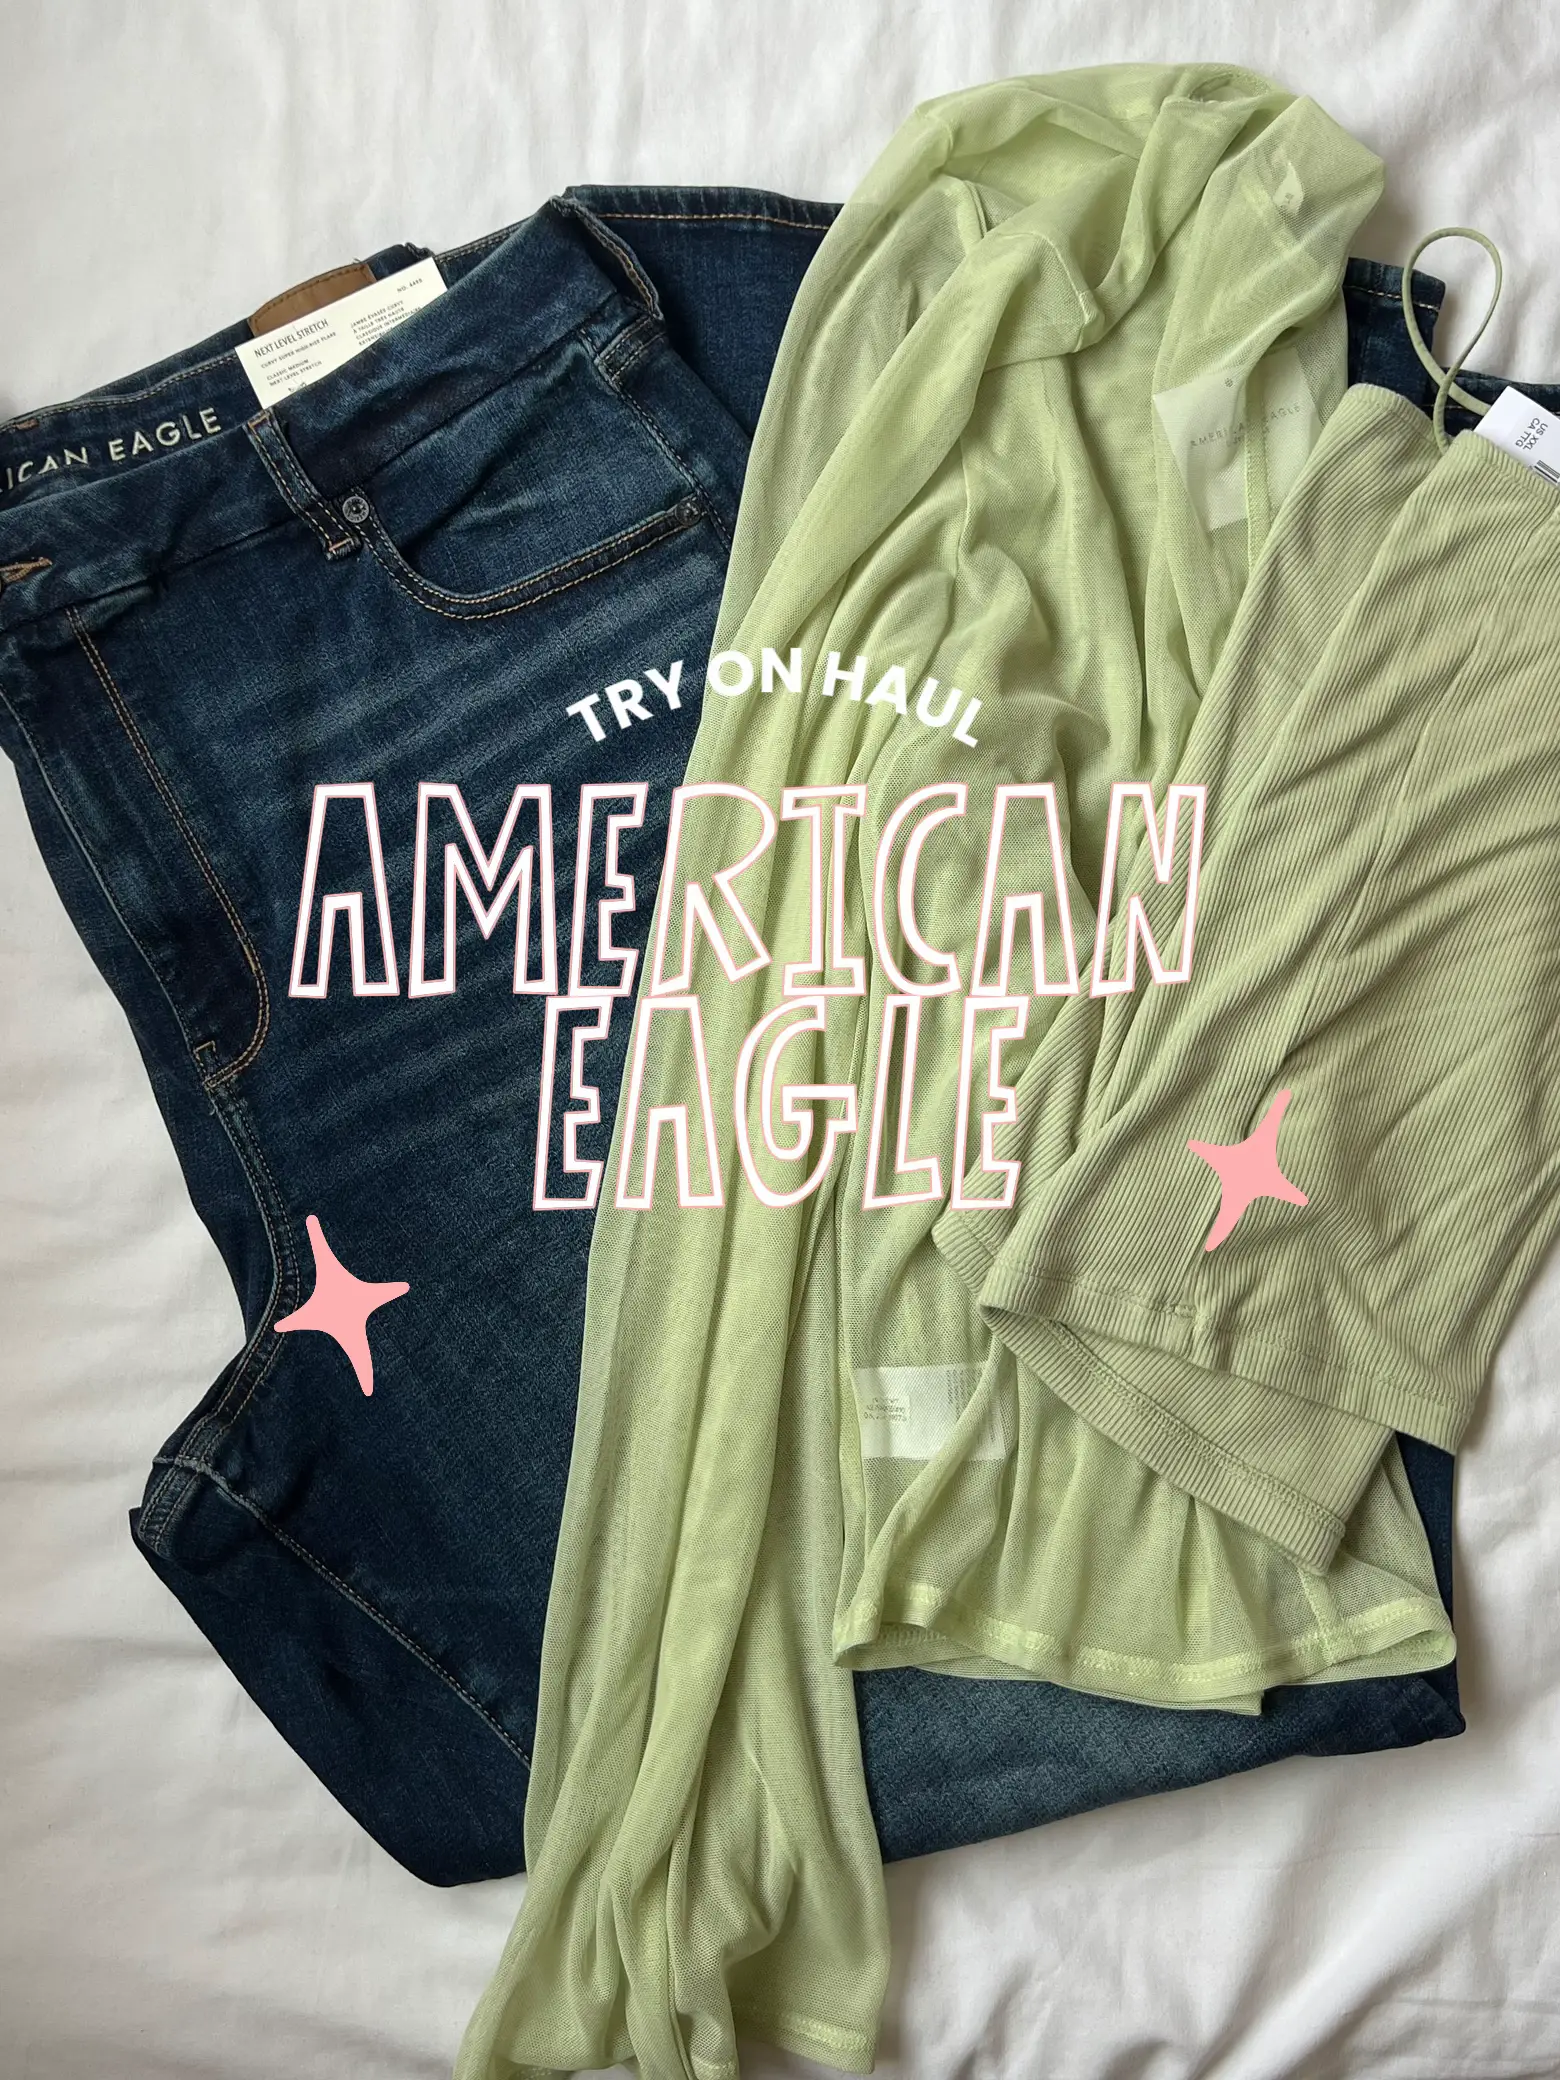 AERIE & AMERICAN EAGLE FALL TRY-ON HAUL!